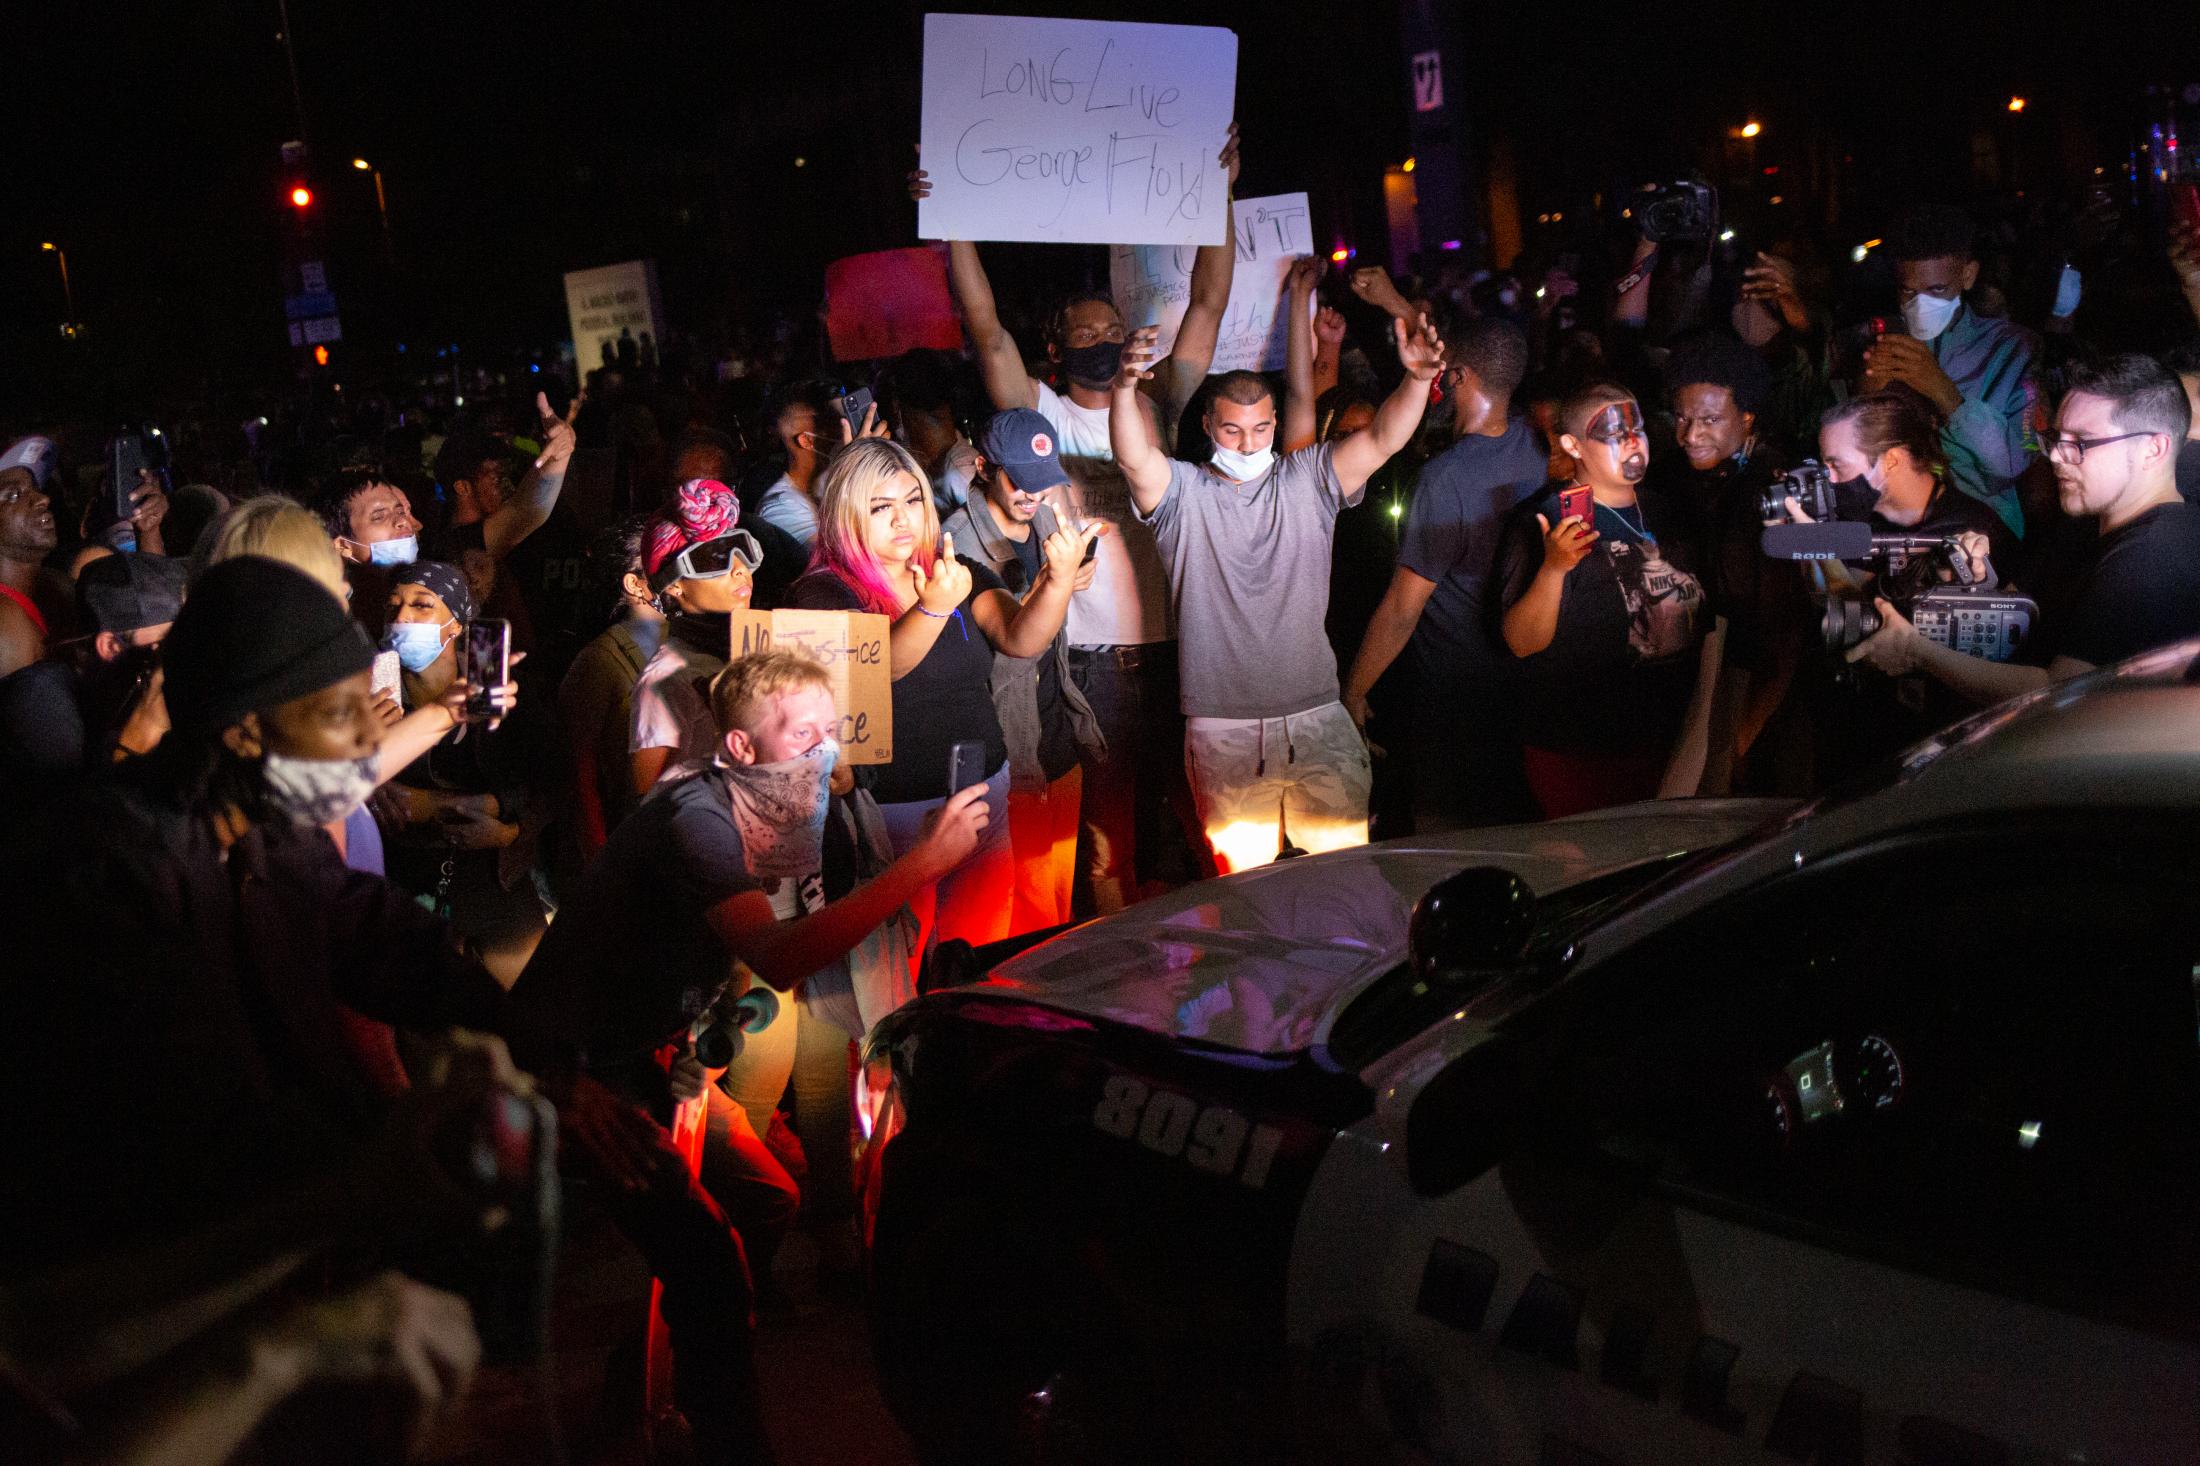 A crowd storms around a police cruiser with signs and frustration as police start to intervene...